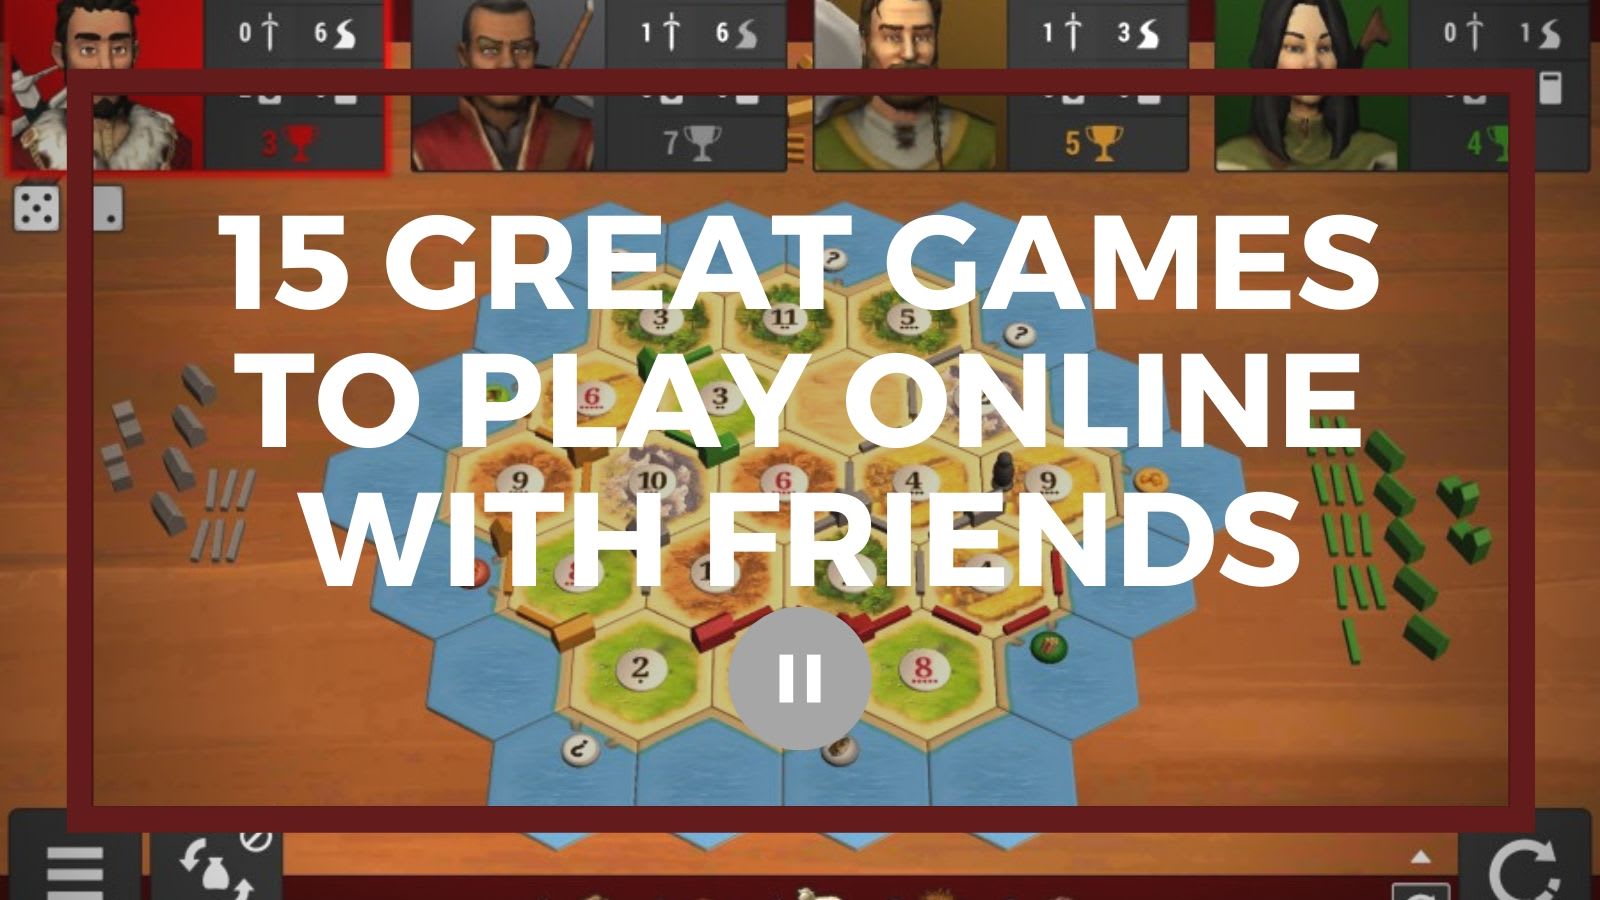 21 Best Online Games to Play With Family and Friends Right Now